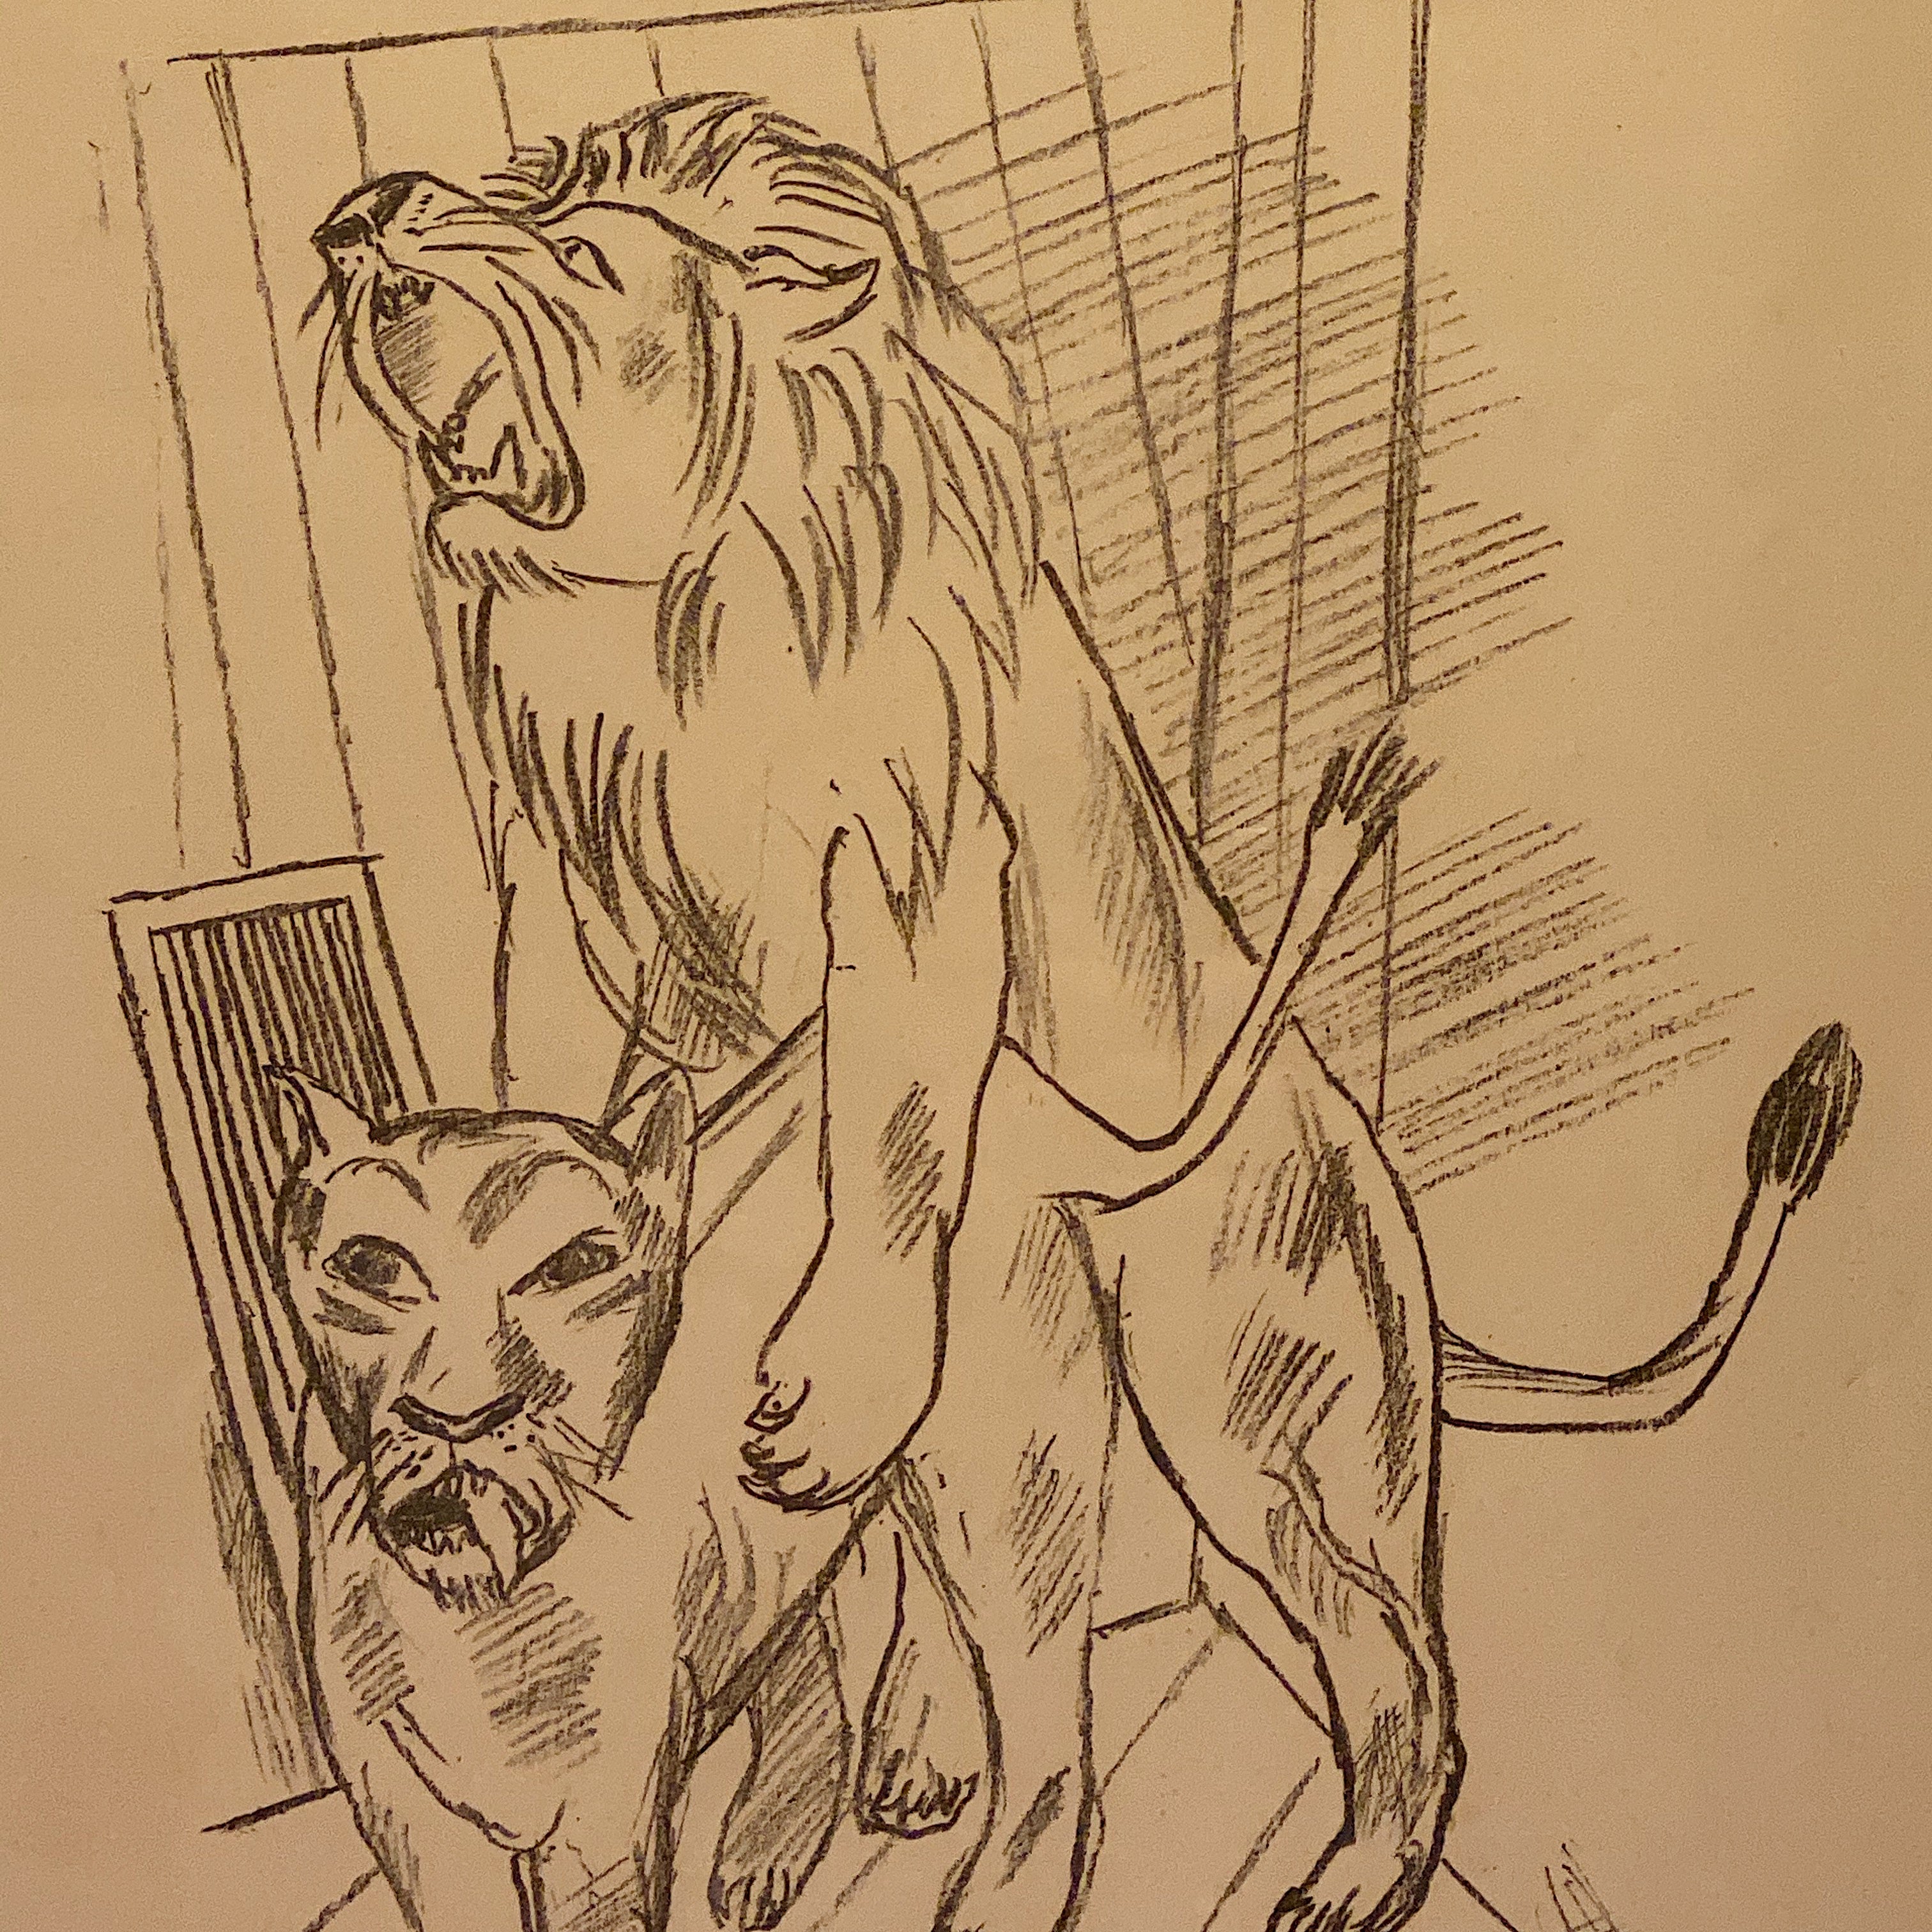 Max Beckmann Signed Lithograph - Lowenpaar - Lion Couple - 1921 - Rare Pencil Signed Limited Edition - Degenerate Art - German Expressionist